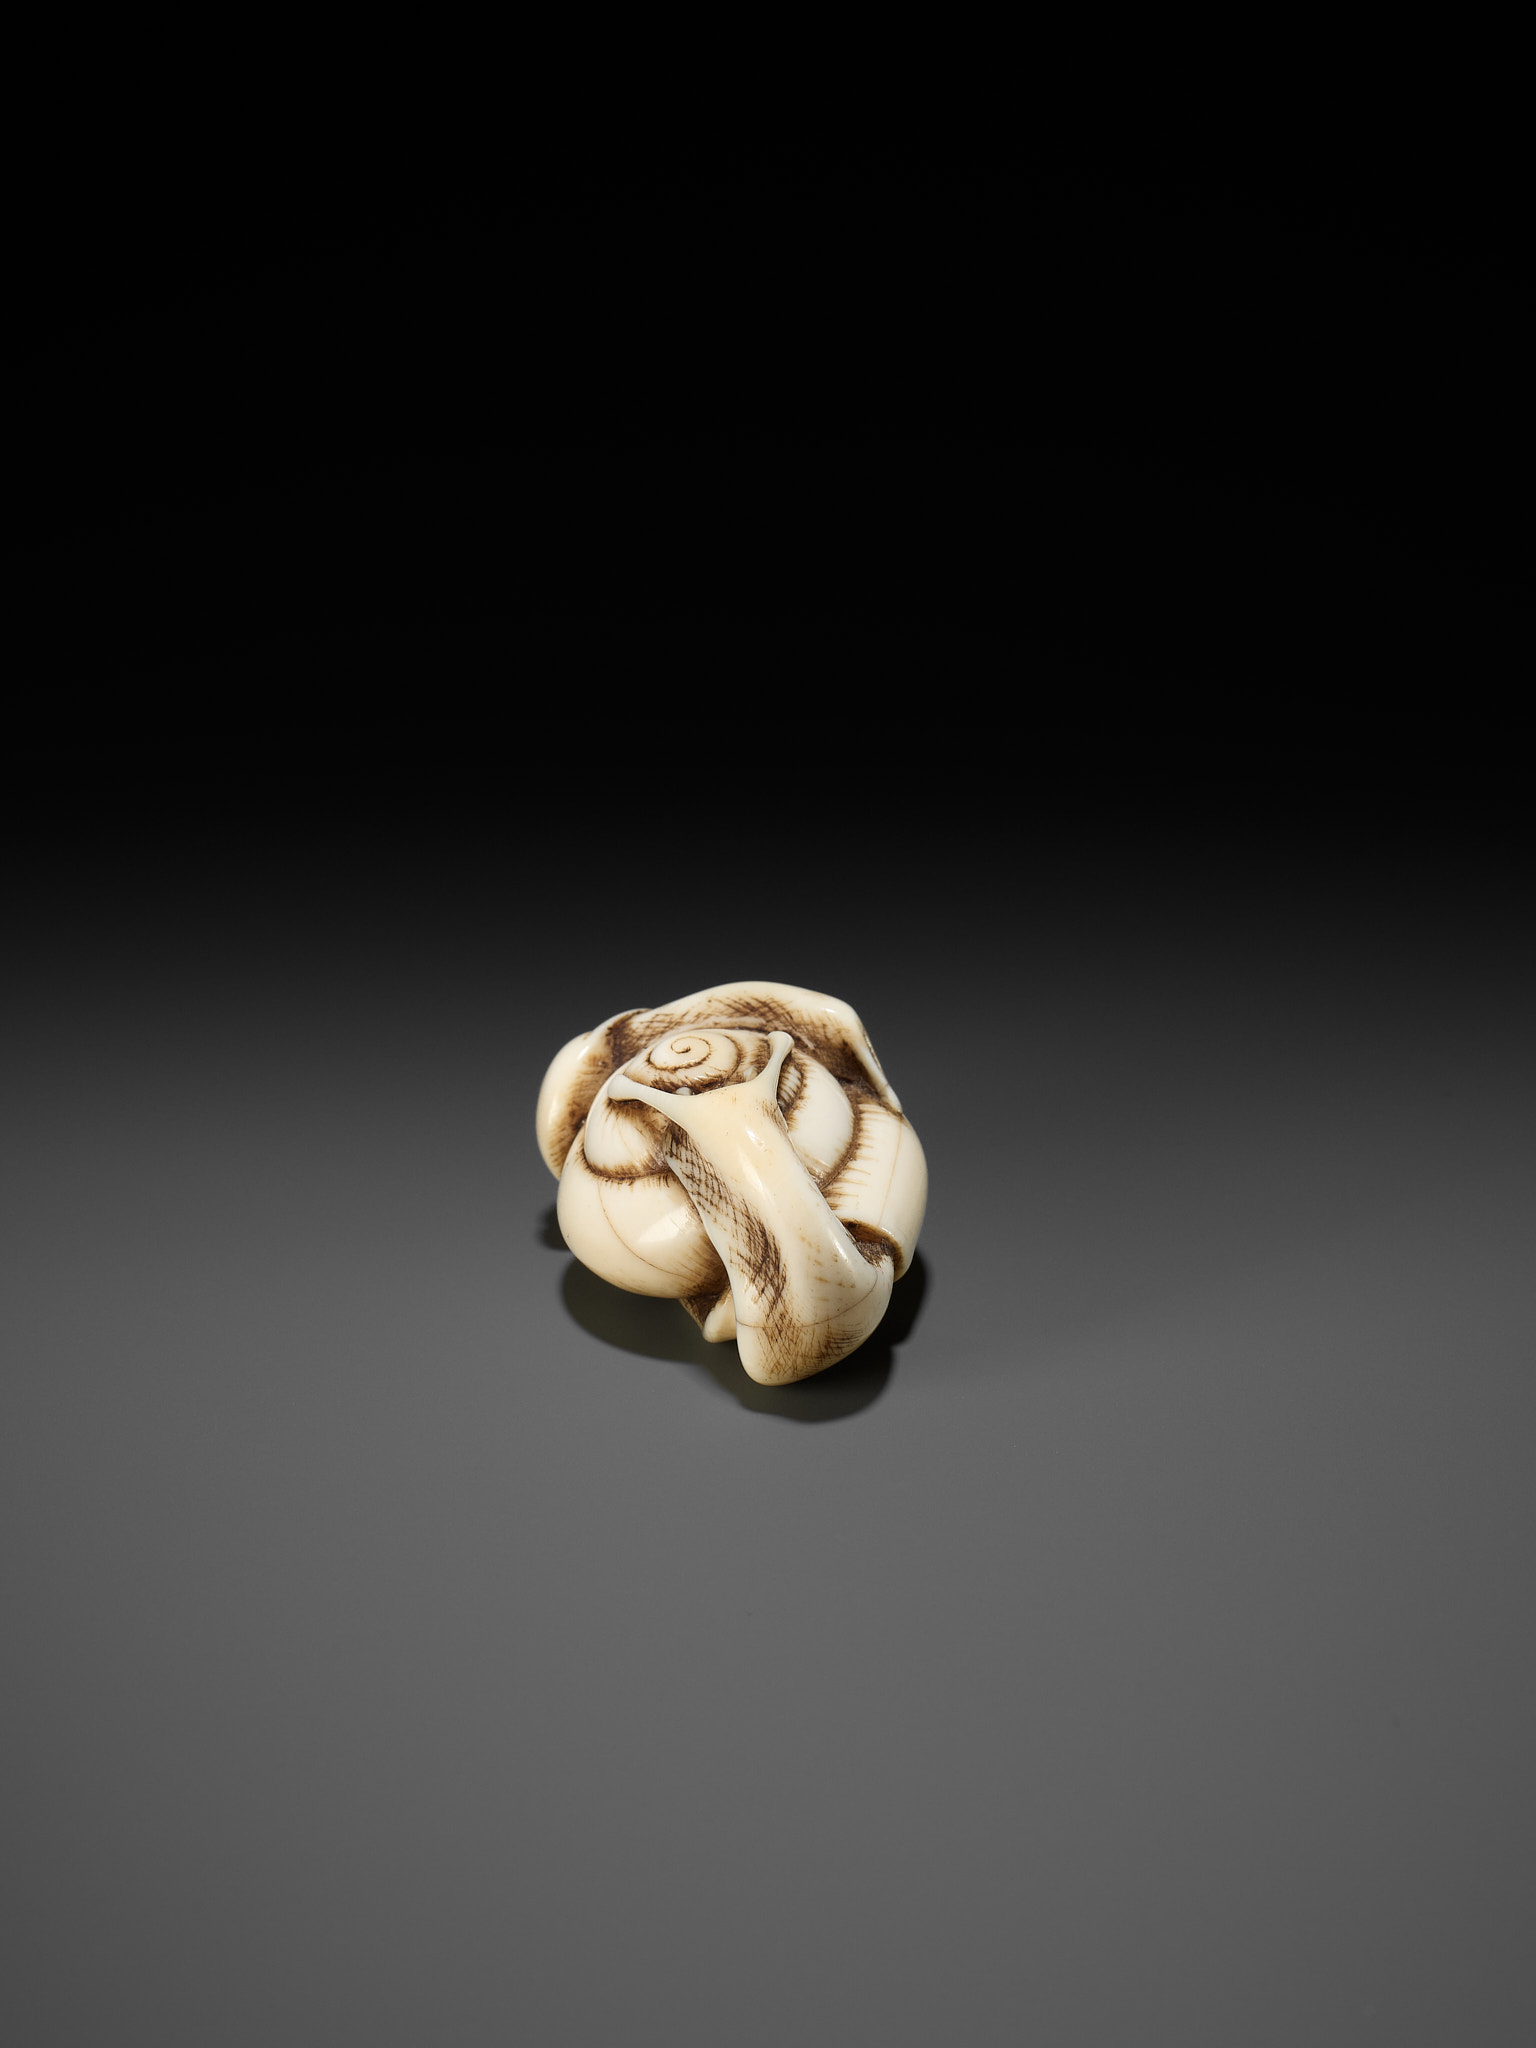 A FINE IVORY NETSUKE DEPICTING A PAIR OF SNAILS - Image 7 of 11